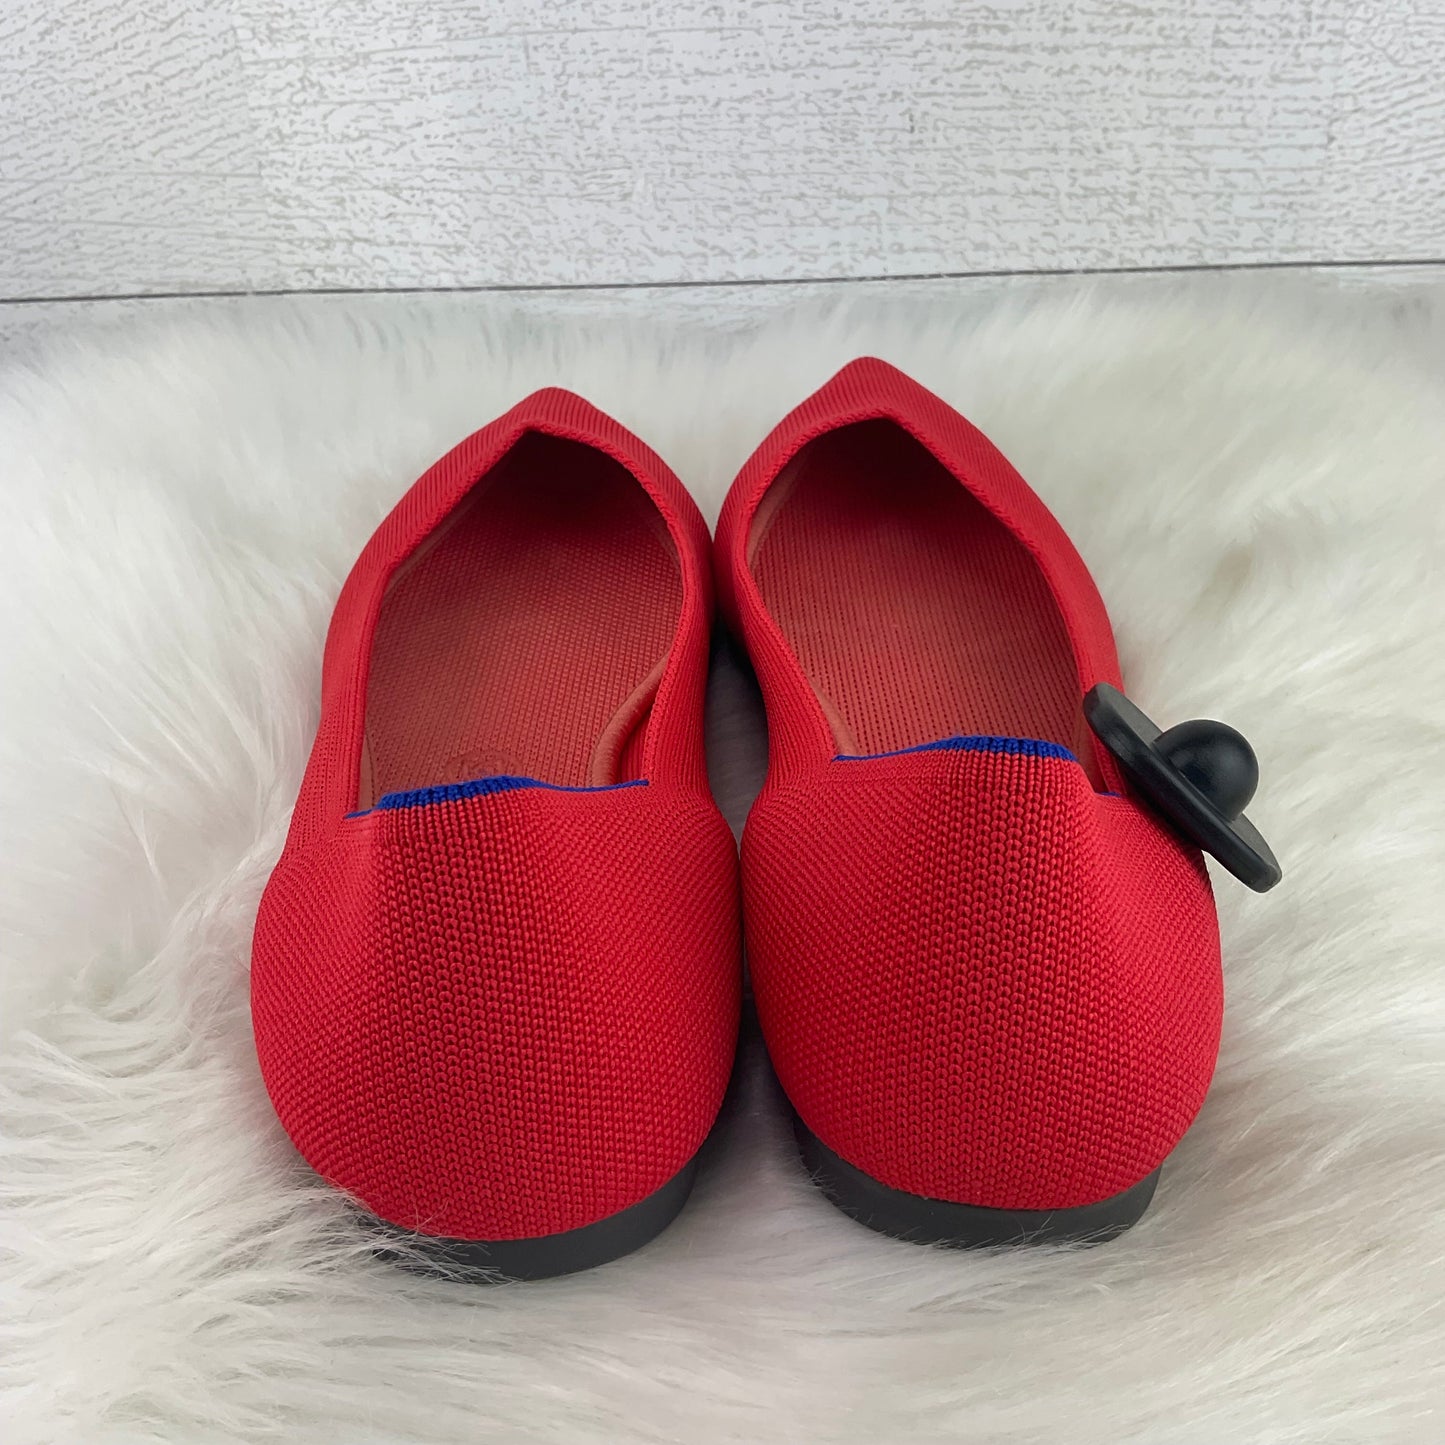 Red Shoes Designer Rothys, Size 11.5